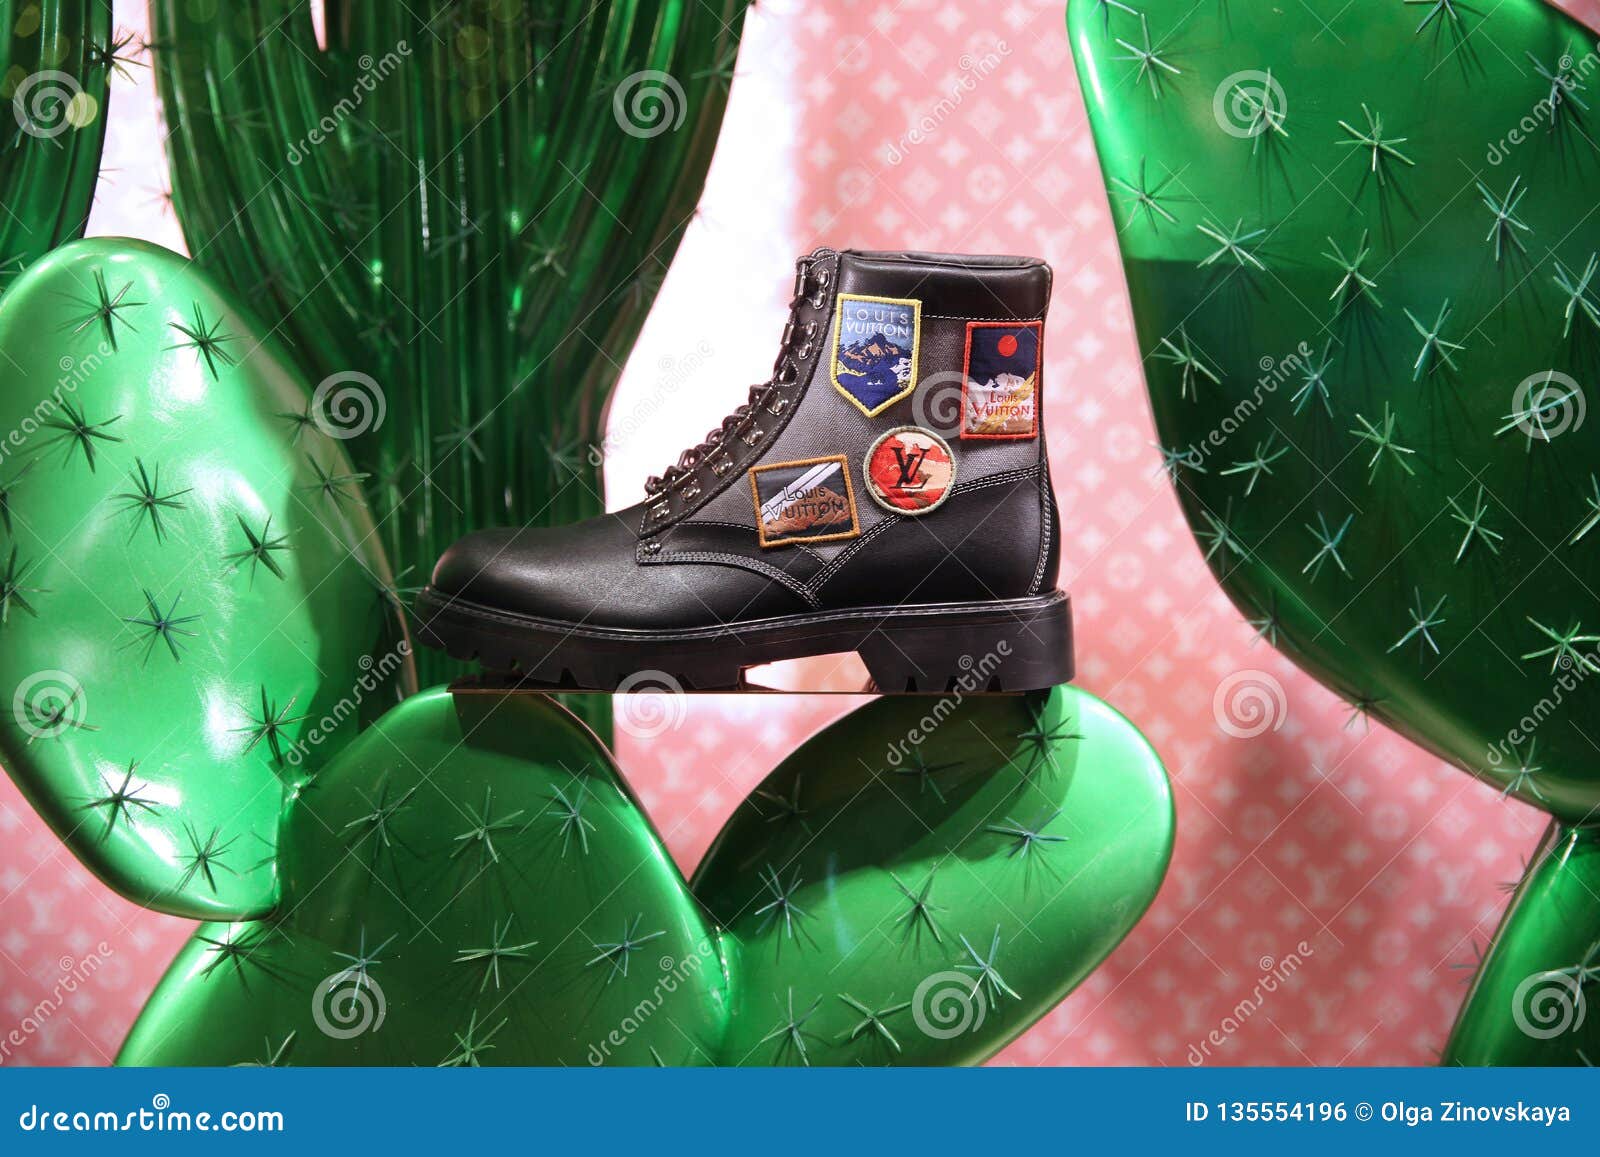 Shoes In The Shop Window Louis Vuitton. Moscow. 21.12.2018 Editorial Photo - Image of shoes ...